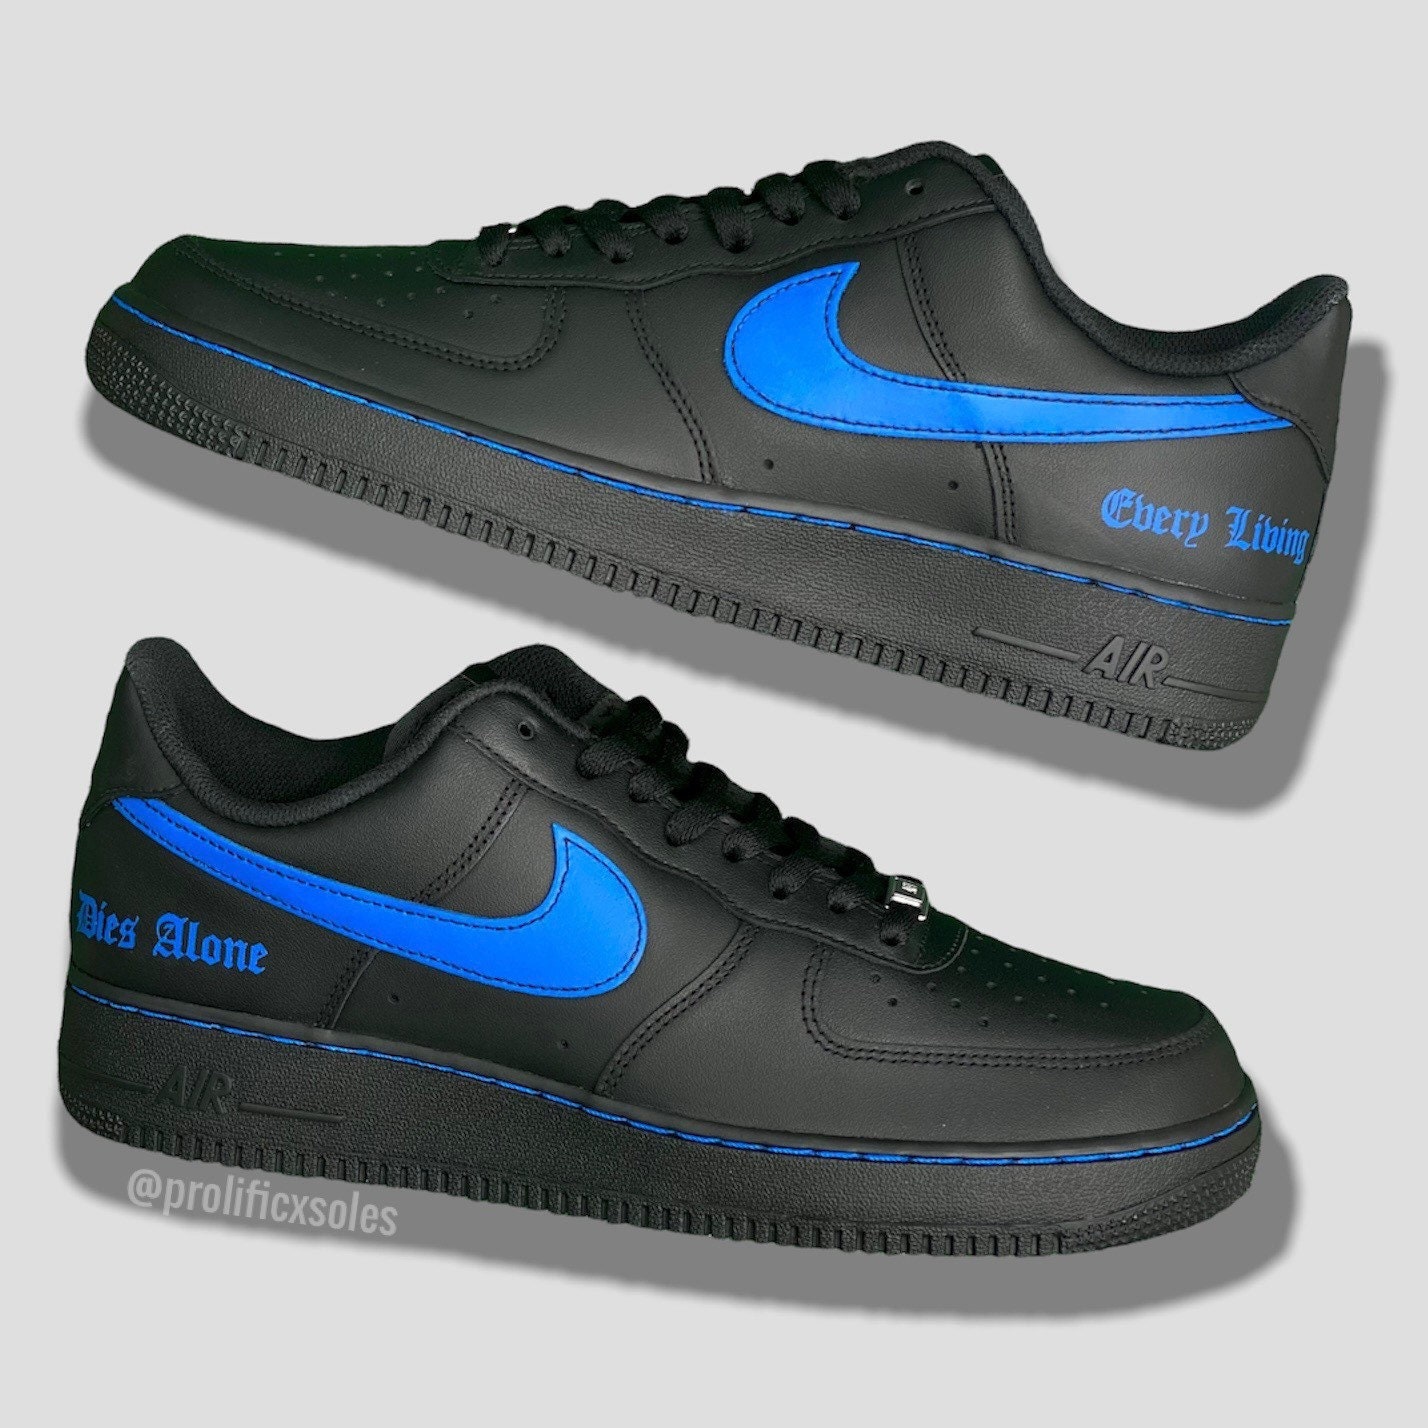 Air Force 1 - Etsy